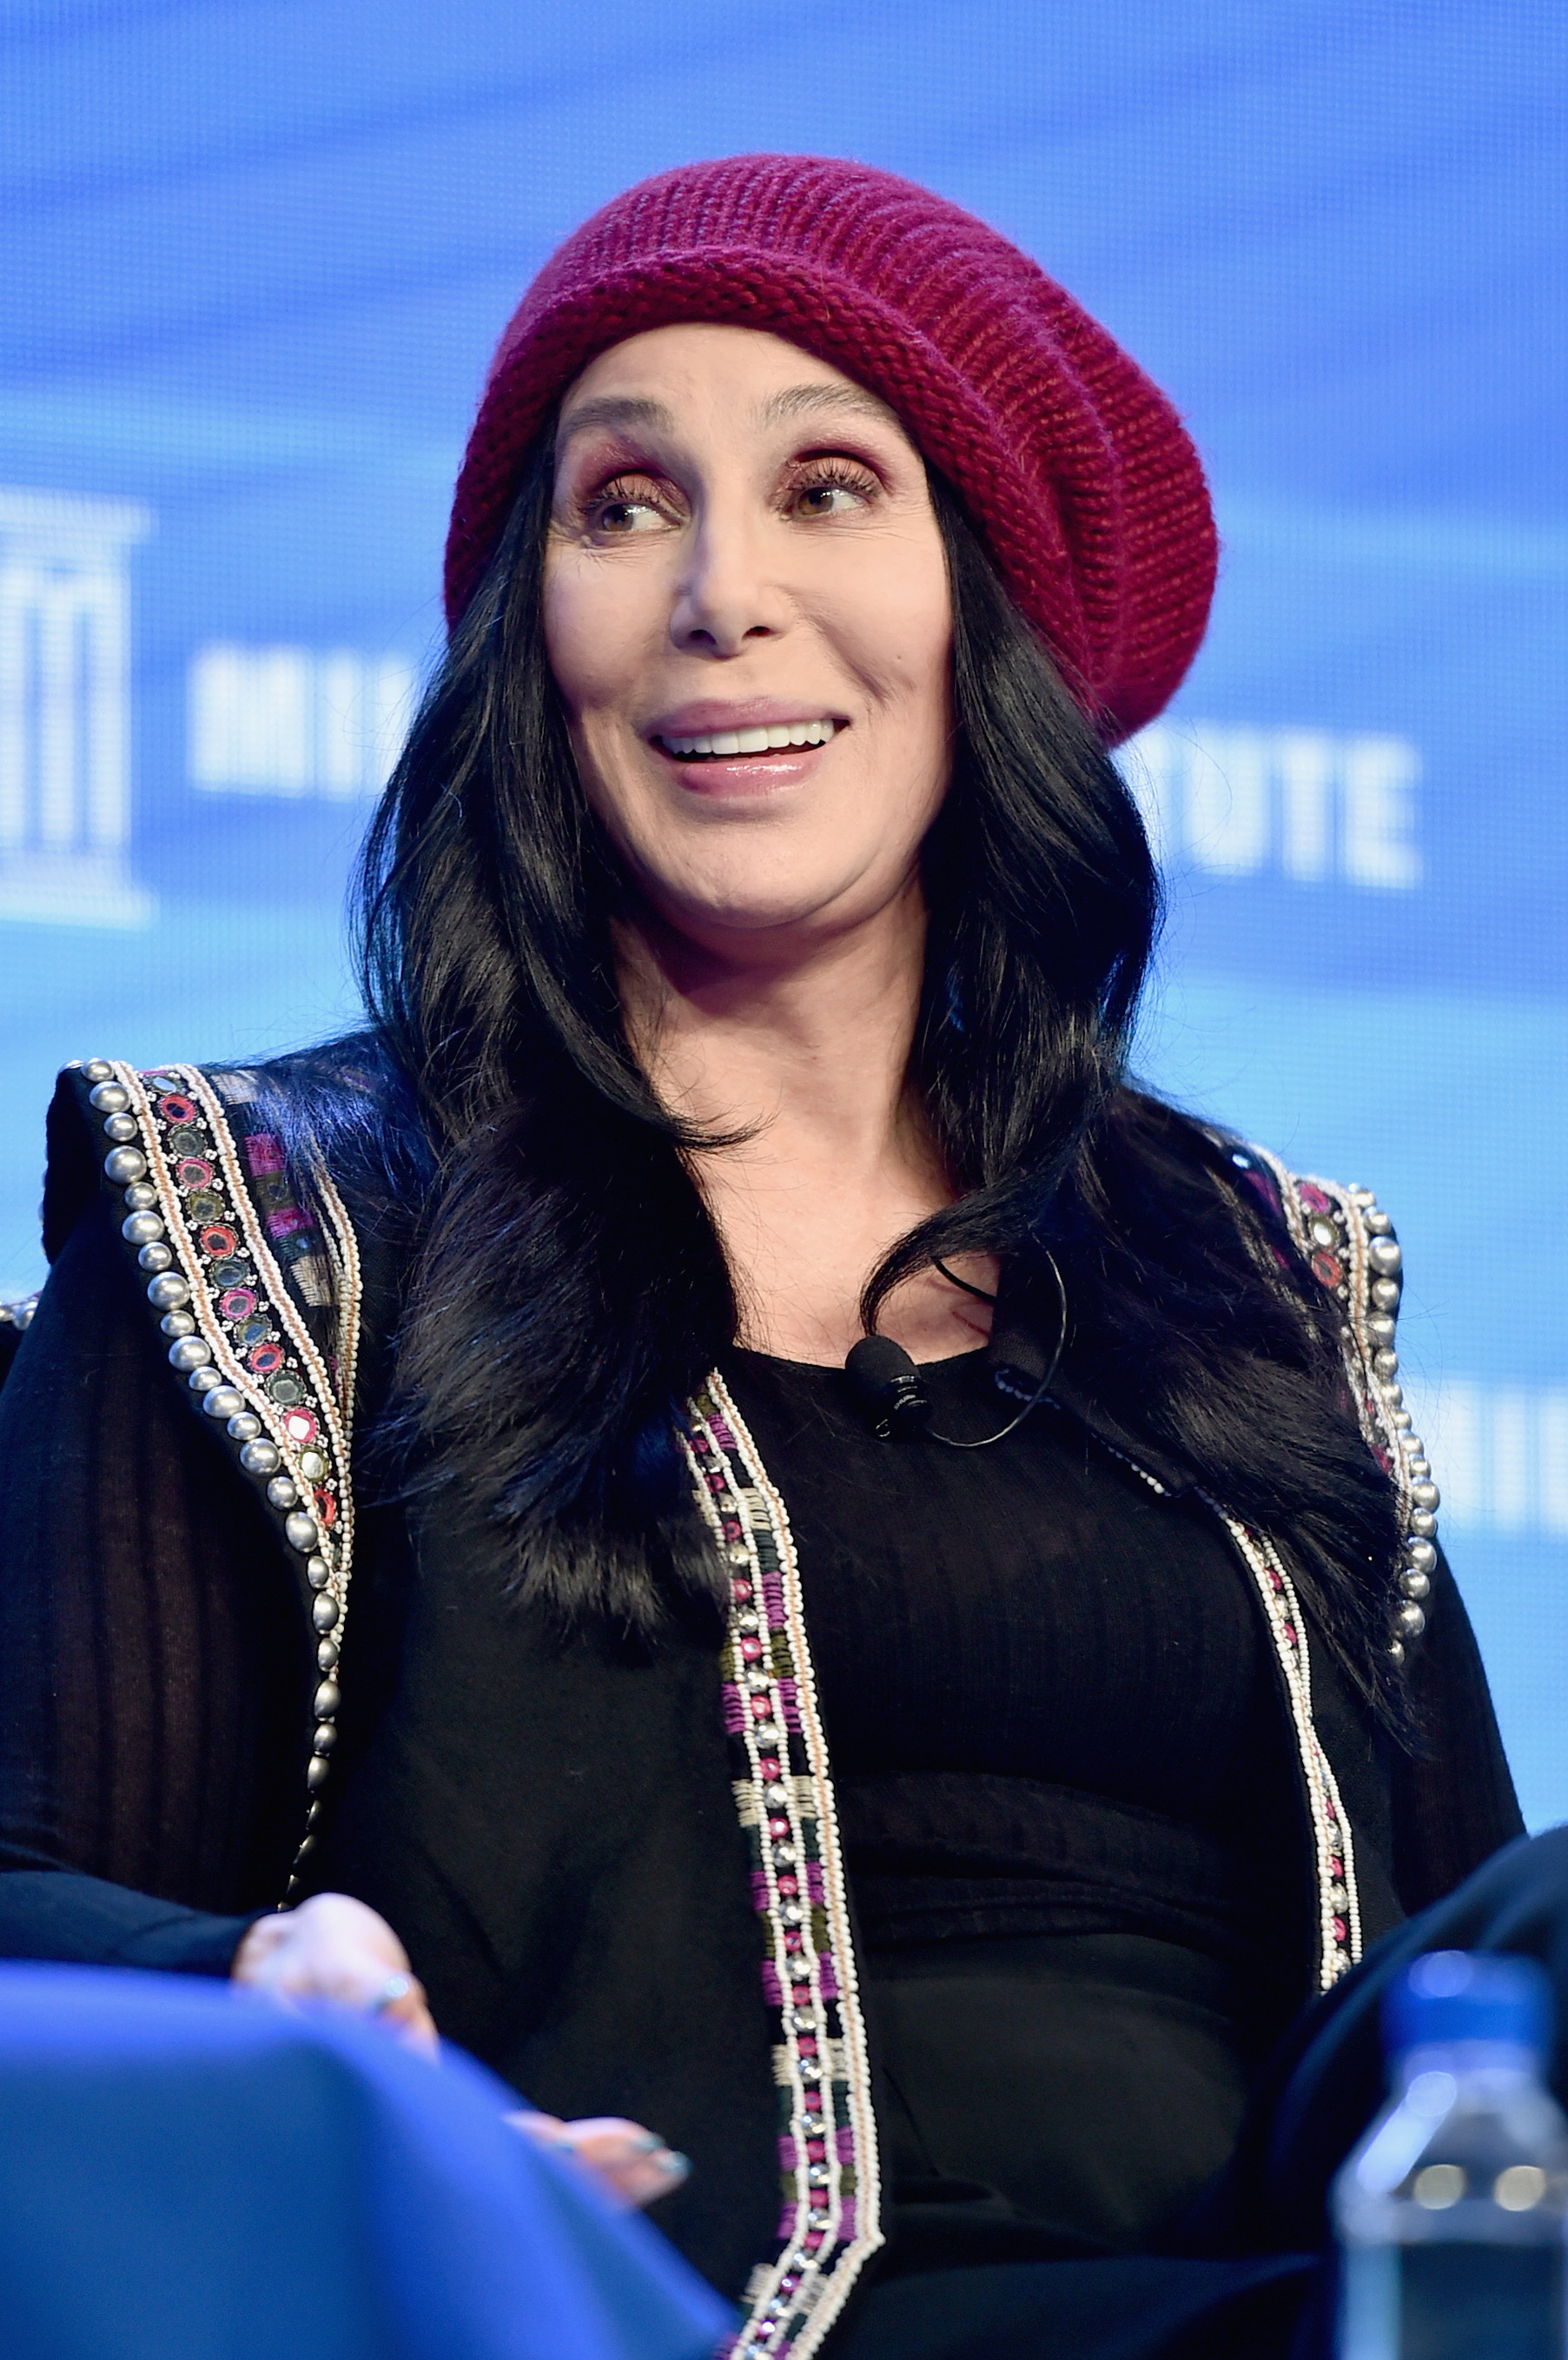 Cher speaks onstage during the 2016 Milken Institute Global Conference in Beverly Hills, Calif. on May 3, 2016.